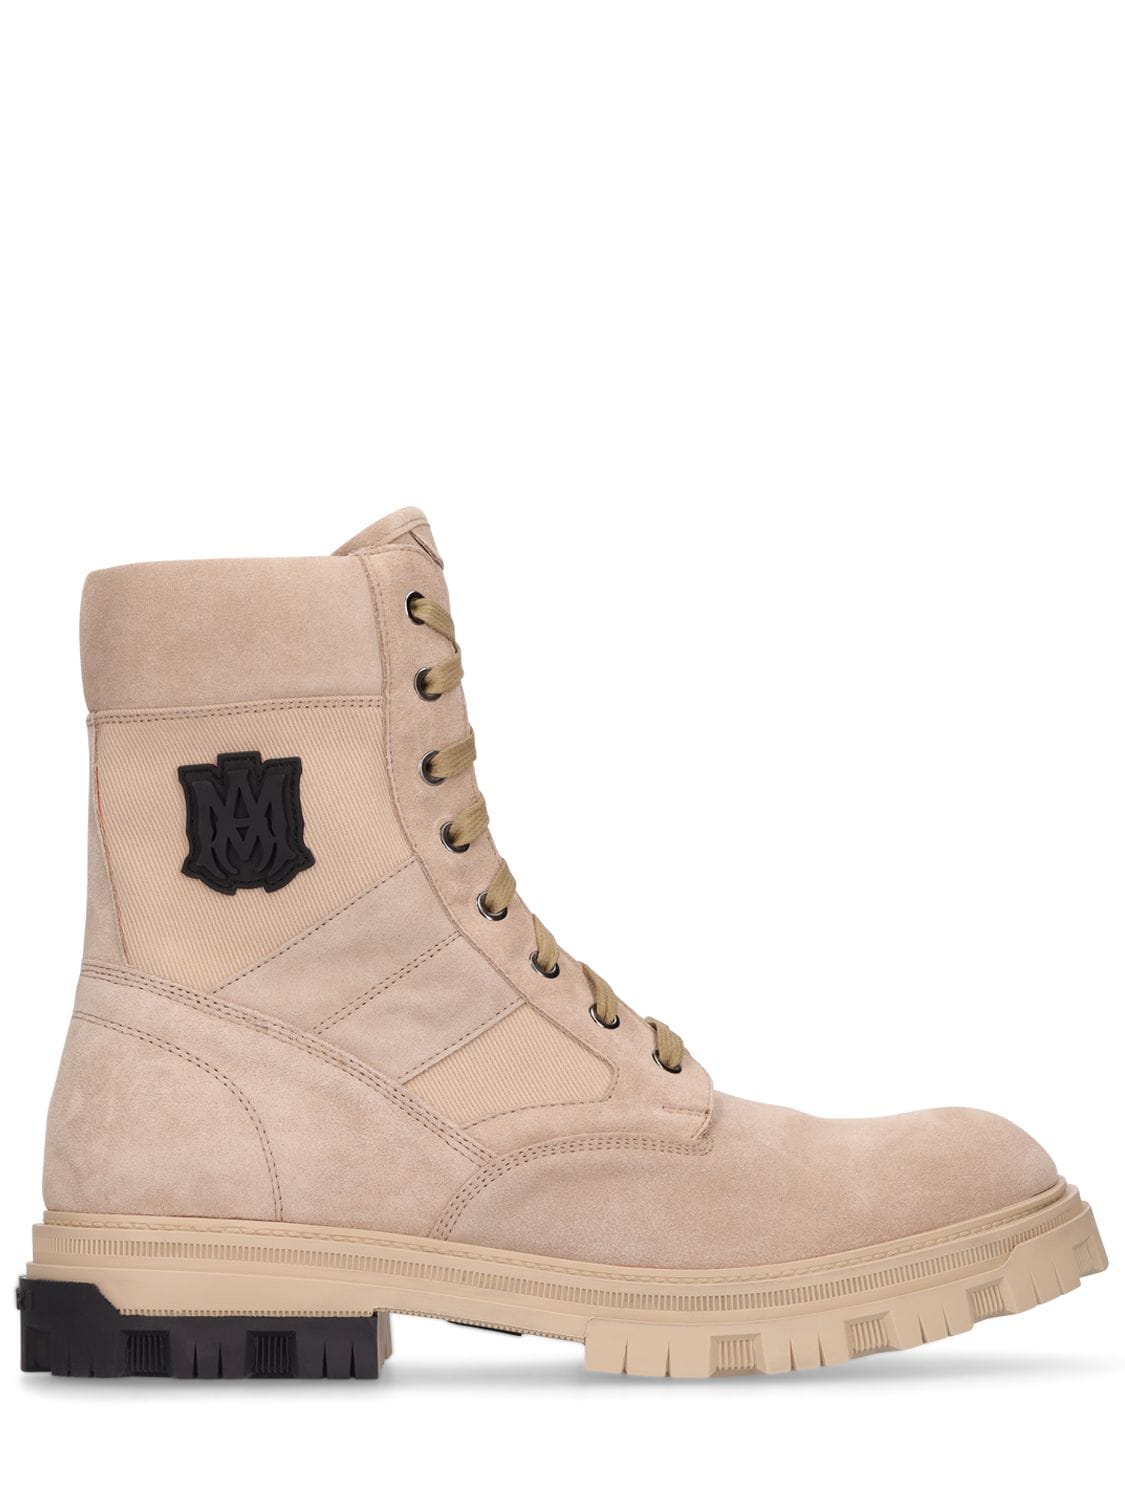 Military Suede & Leather Combat Boots